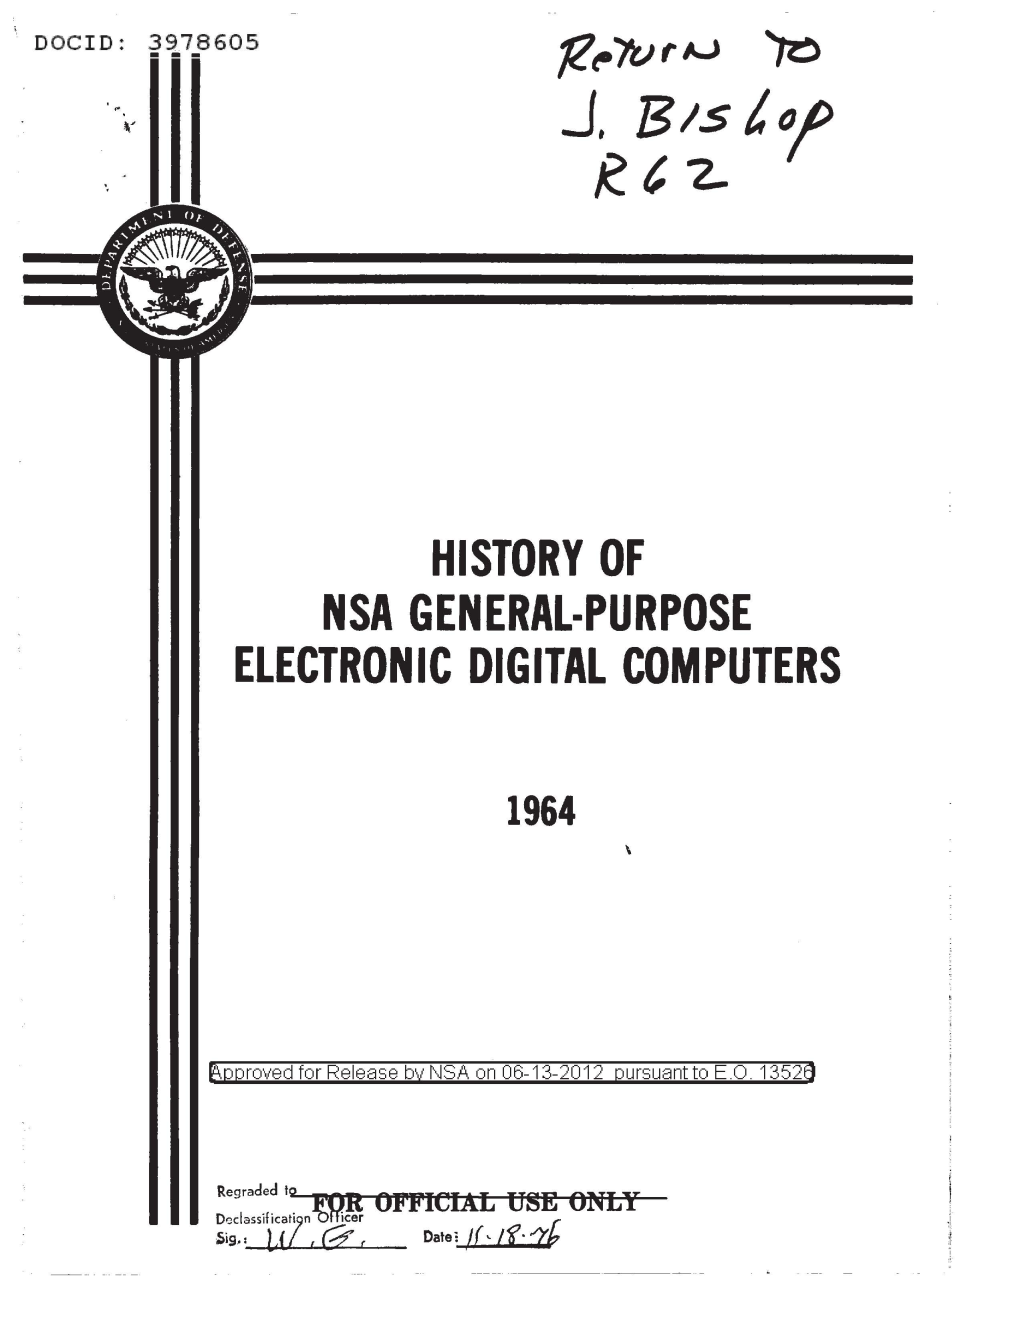 History of NSA General Purpose Electronic Digital Computers